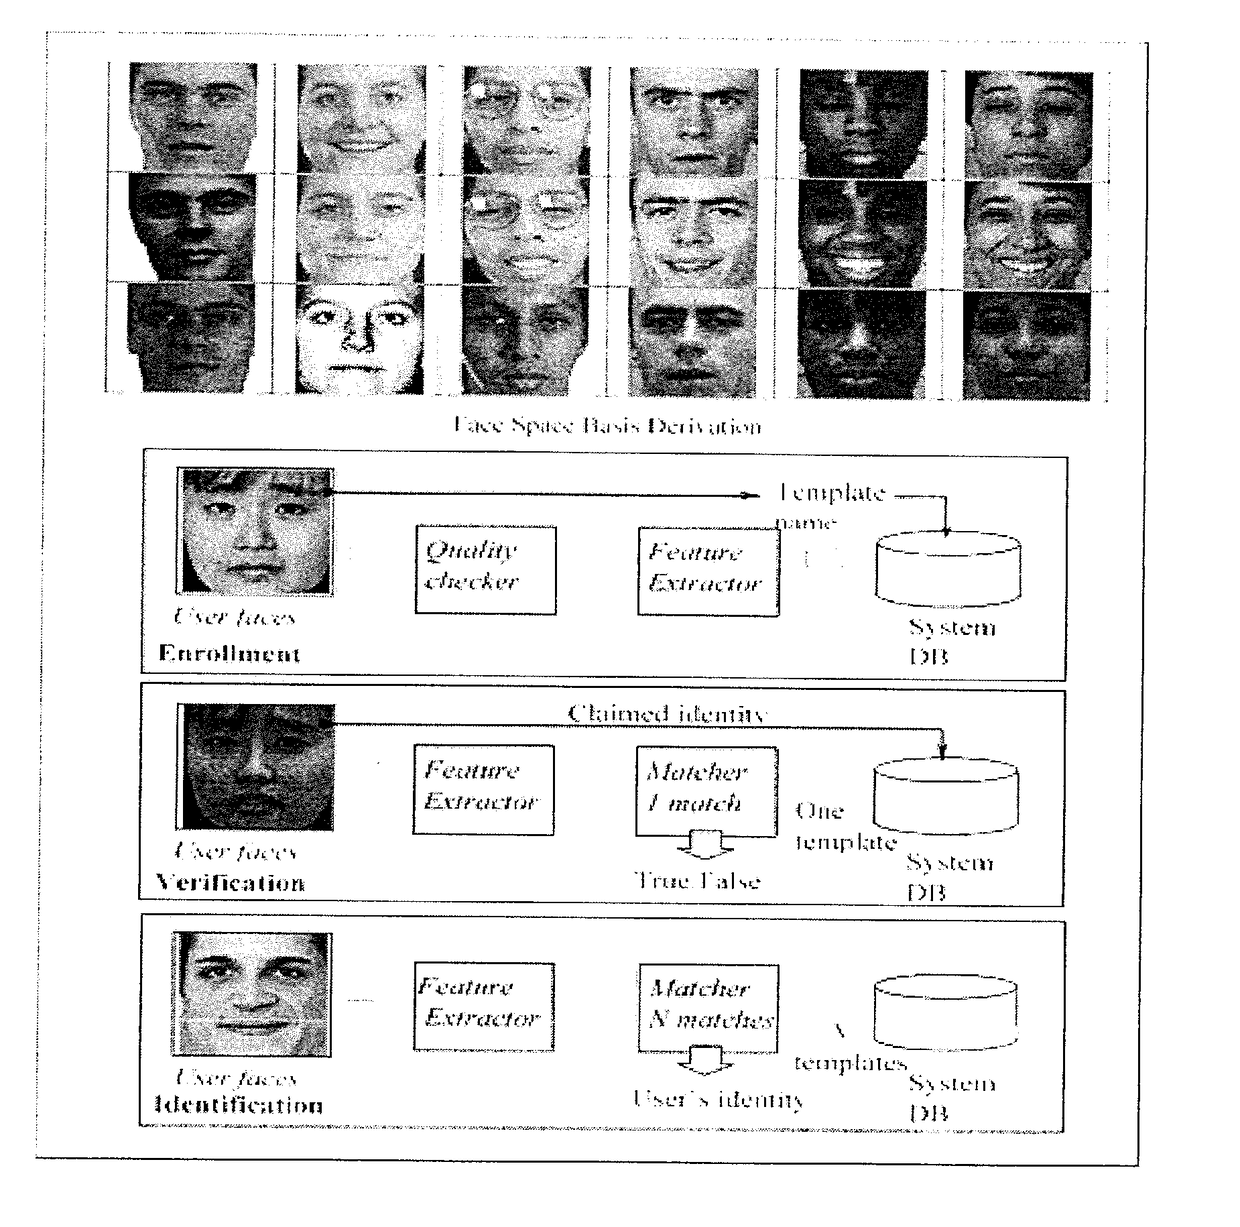 Age invariant face recognition using convolutional neural networks and set distances